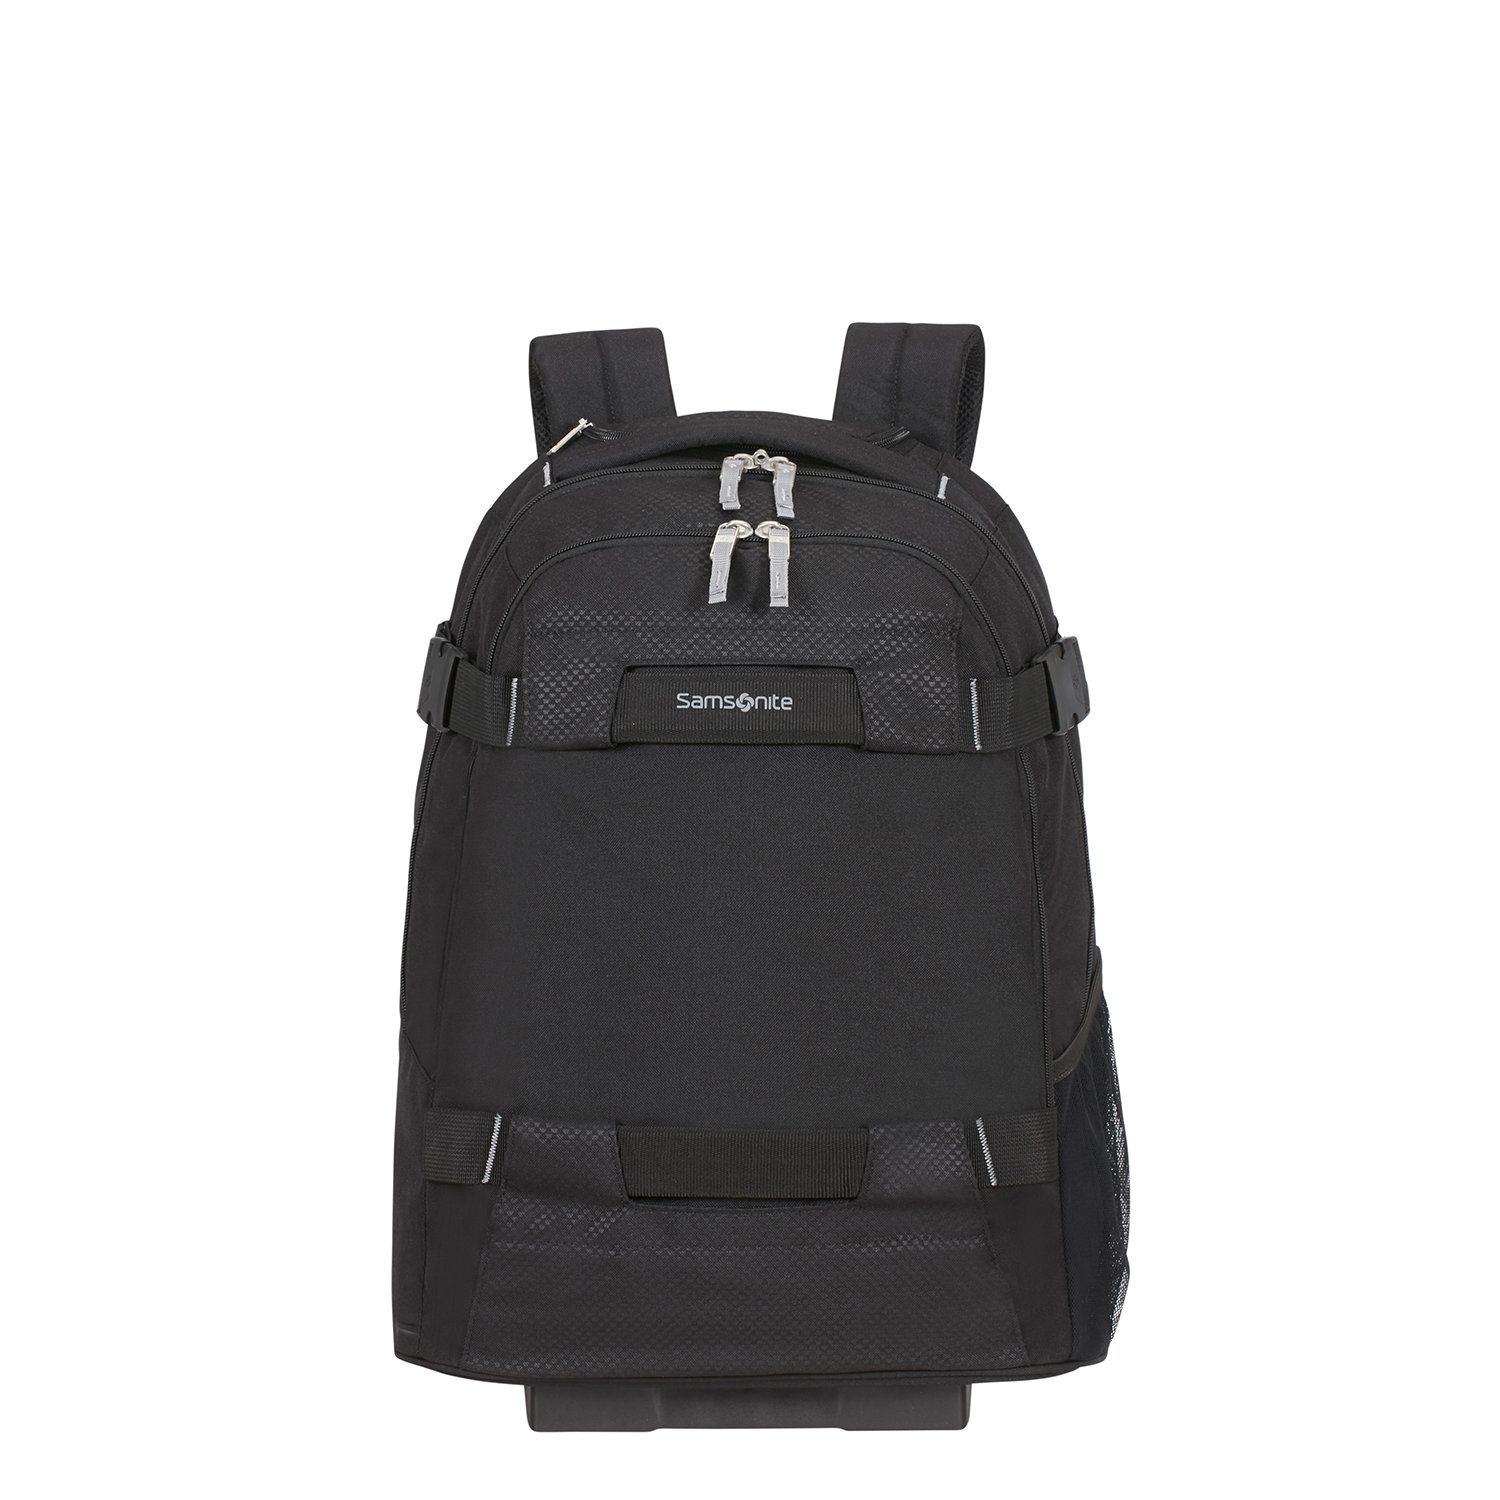 SONORA-LAPTOP BACKPACK/WH 55/20 SKA1-007-SF000*09